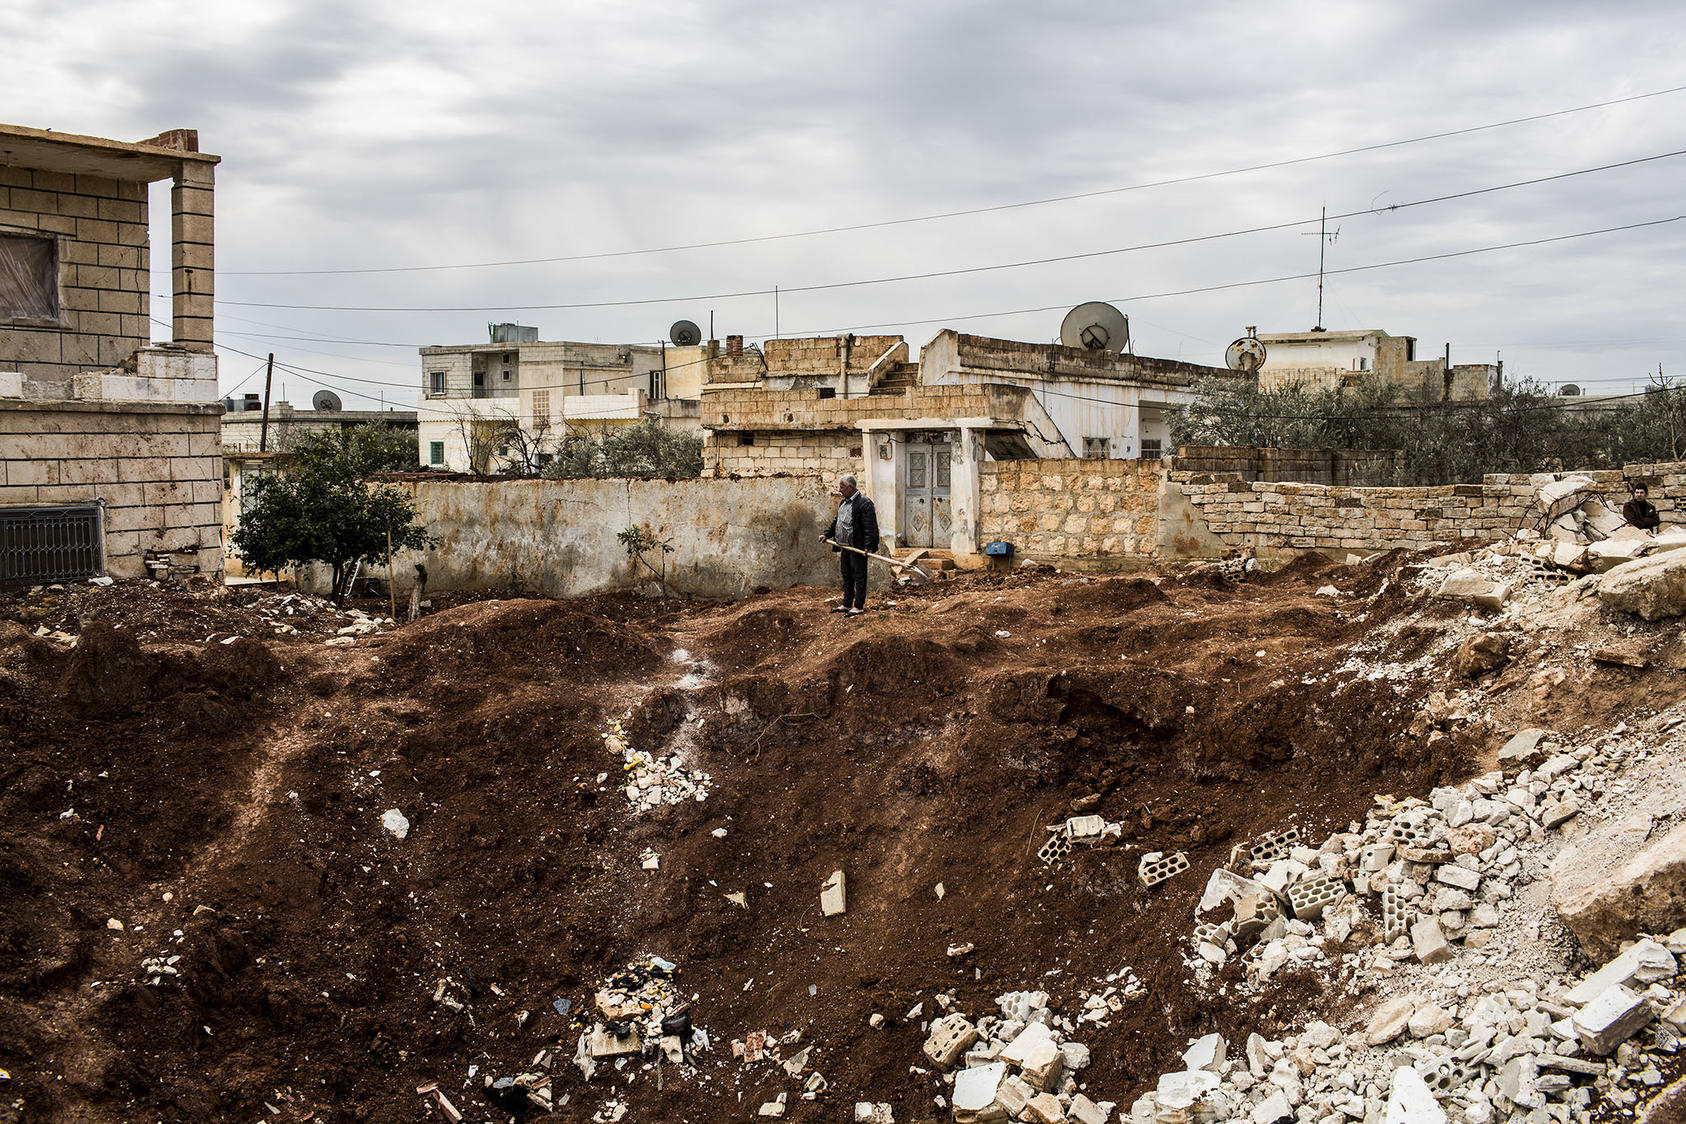 A resident of Syria’s Idlib province surveys a crater from a missile strike in 2013. As the province faces a new offensive, its nascent women’s movement has had to close some of its education centers for women and girls. (Bryan Denton/The New York Times)